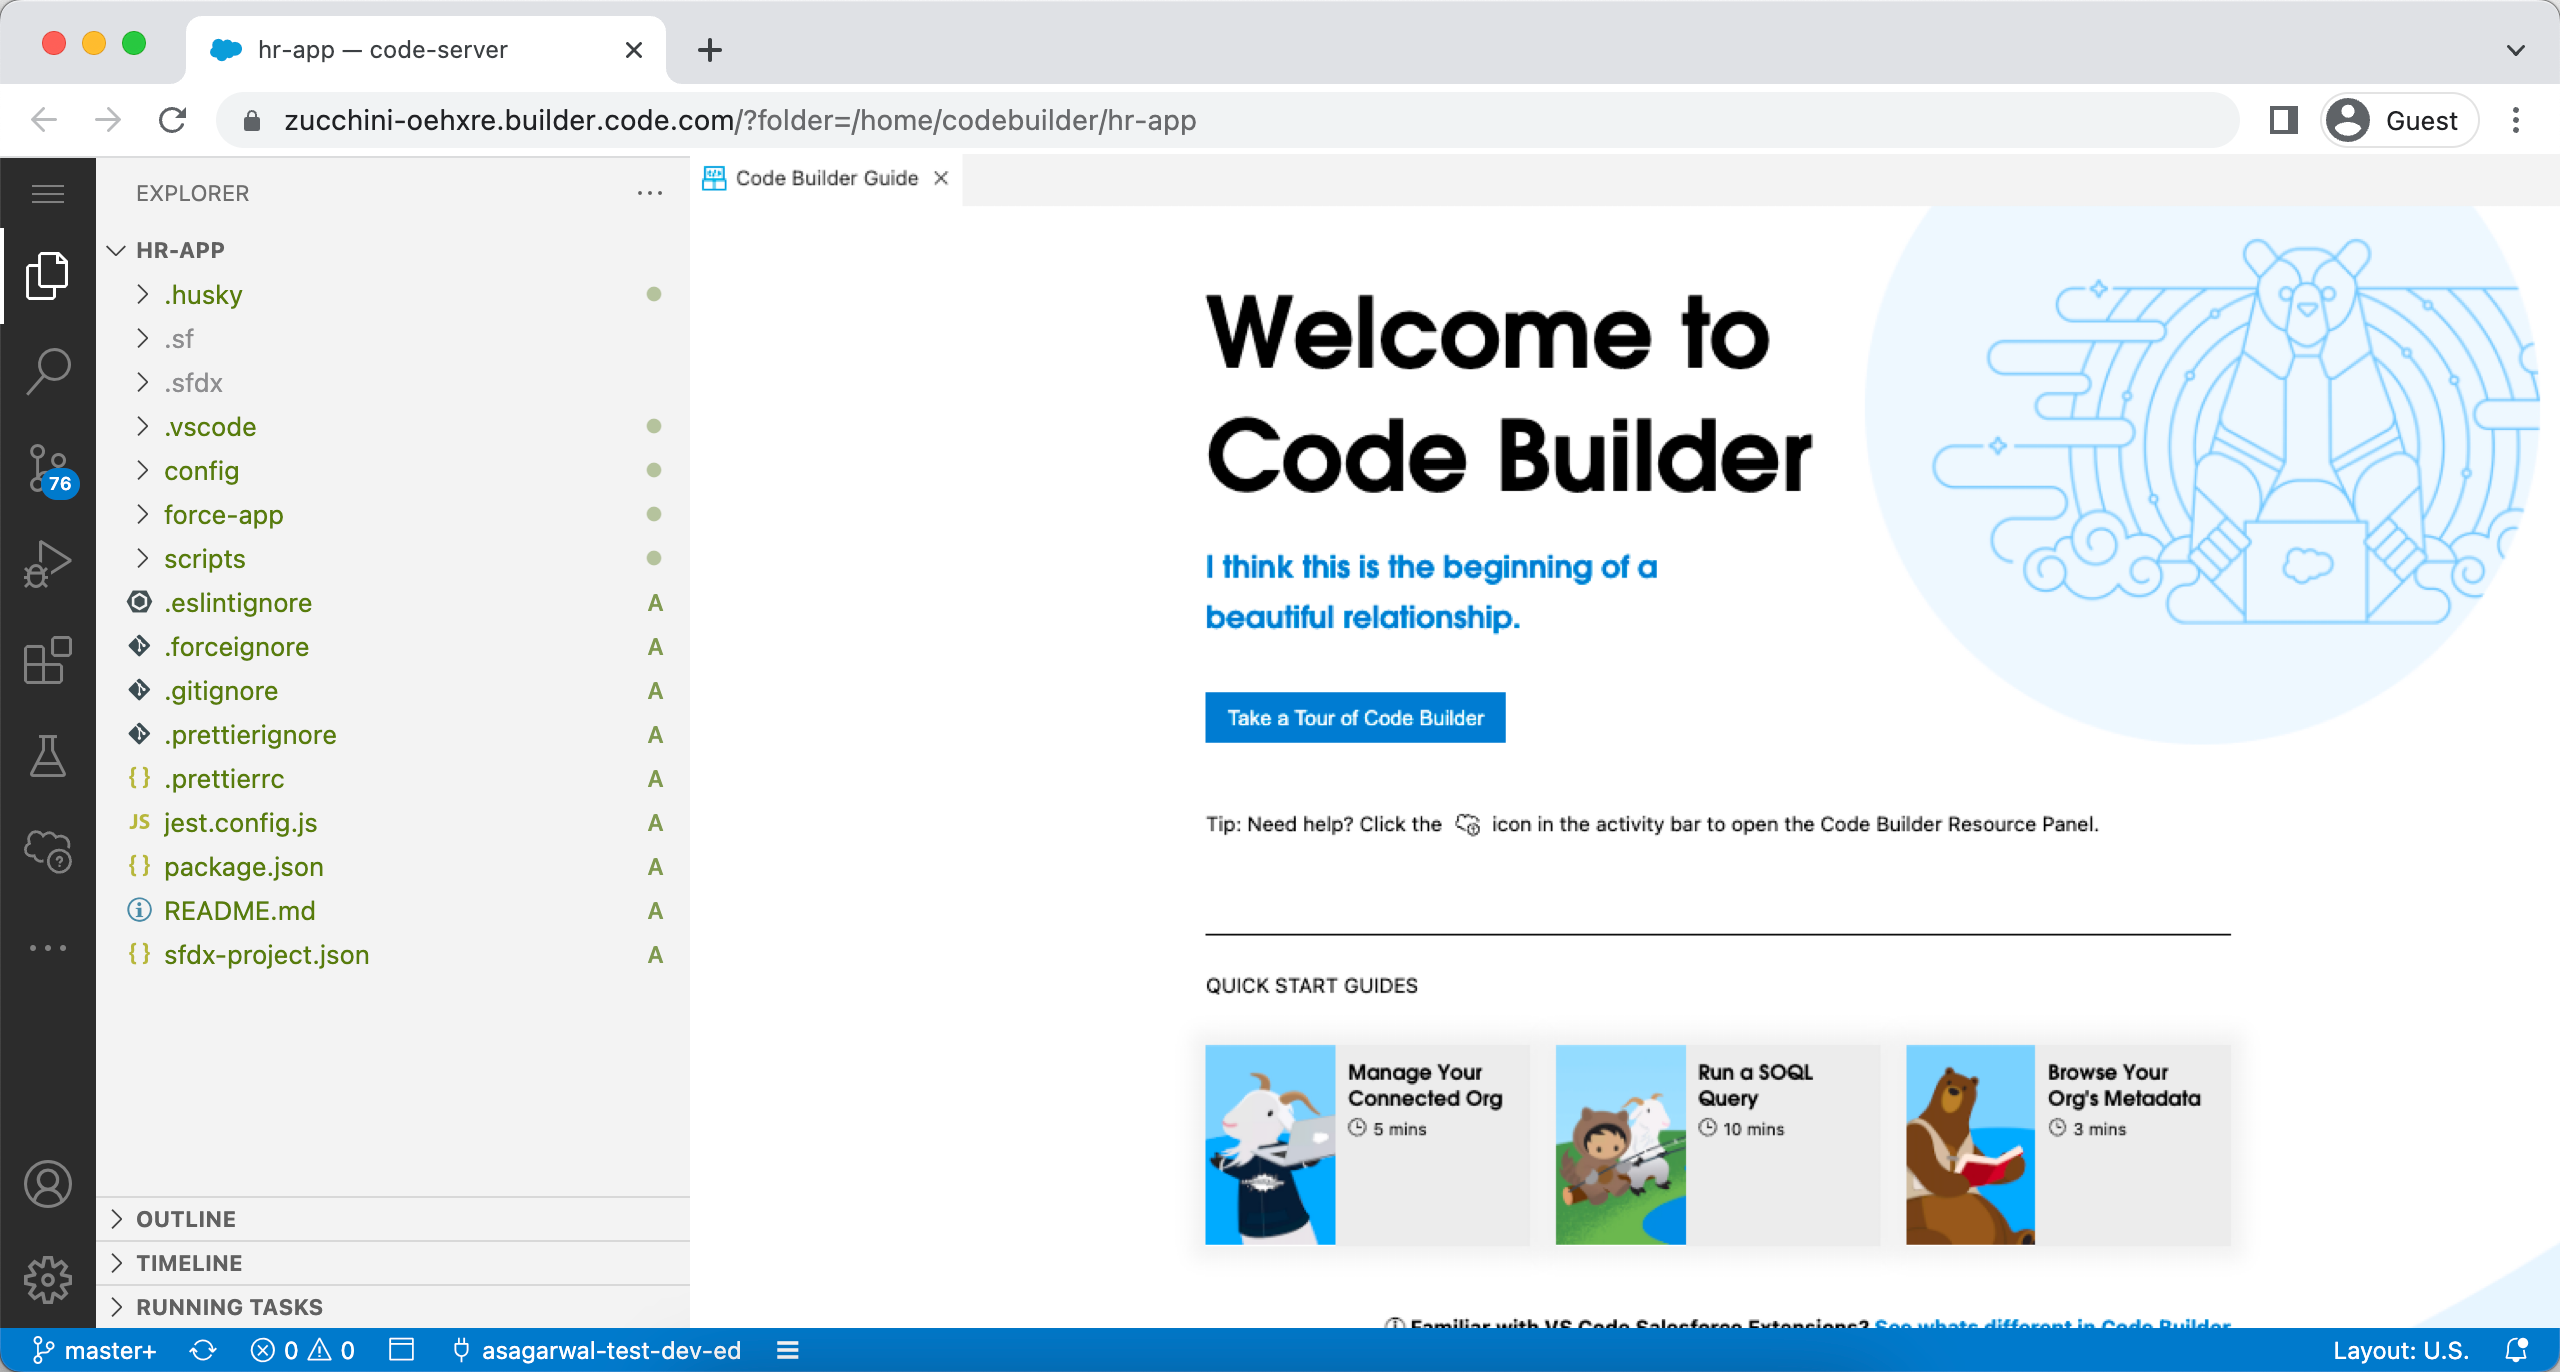 Step by Step Guide to Getting Started with Code Builder